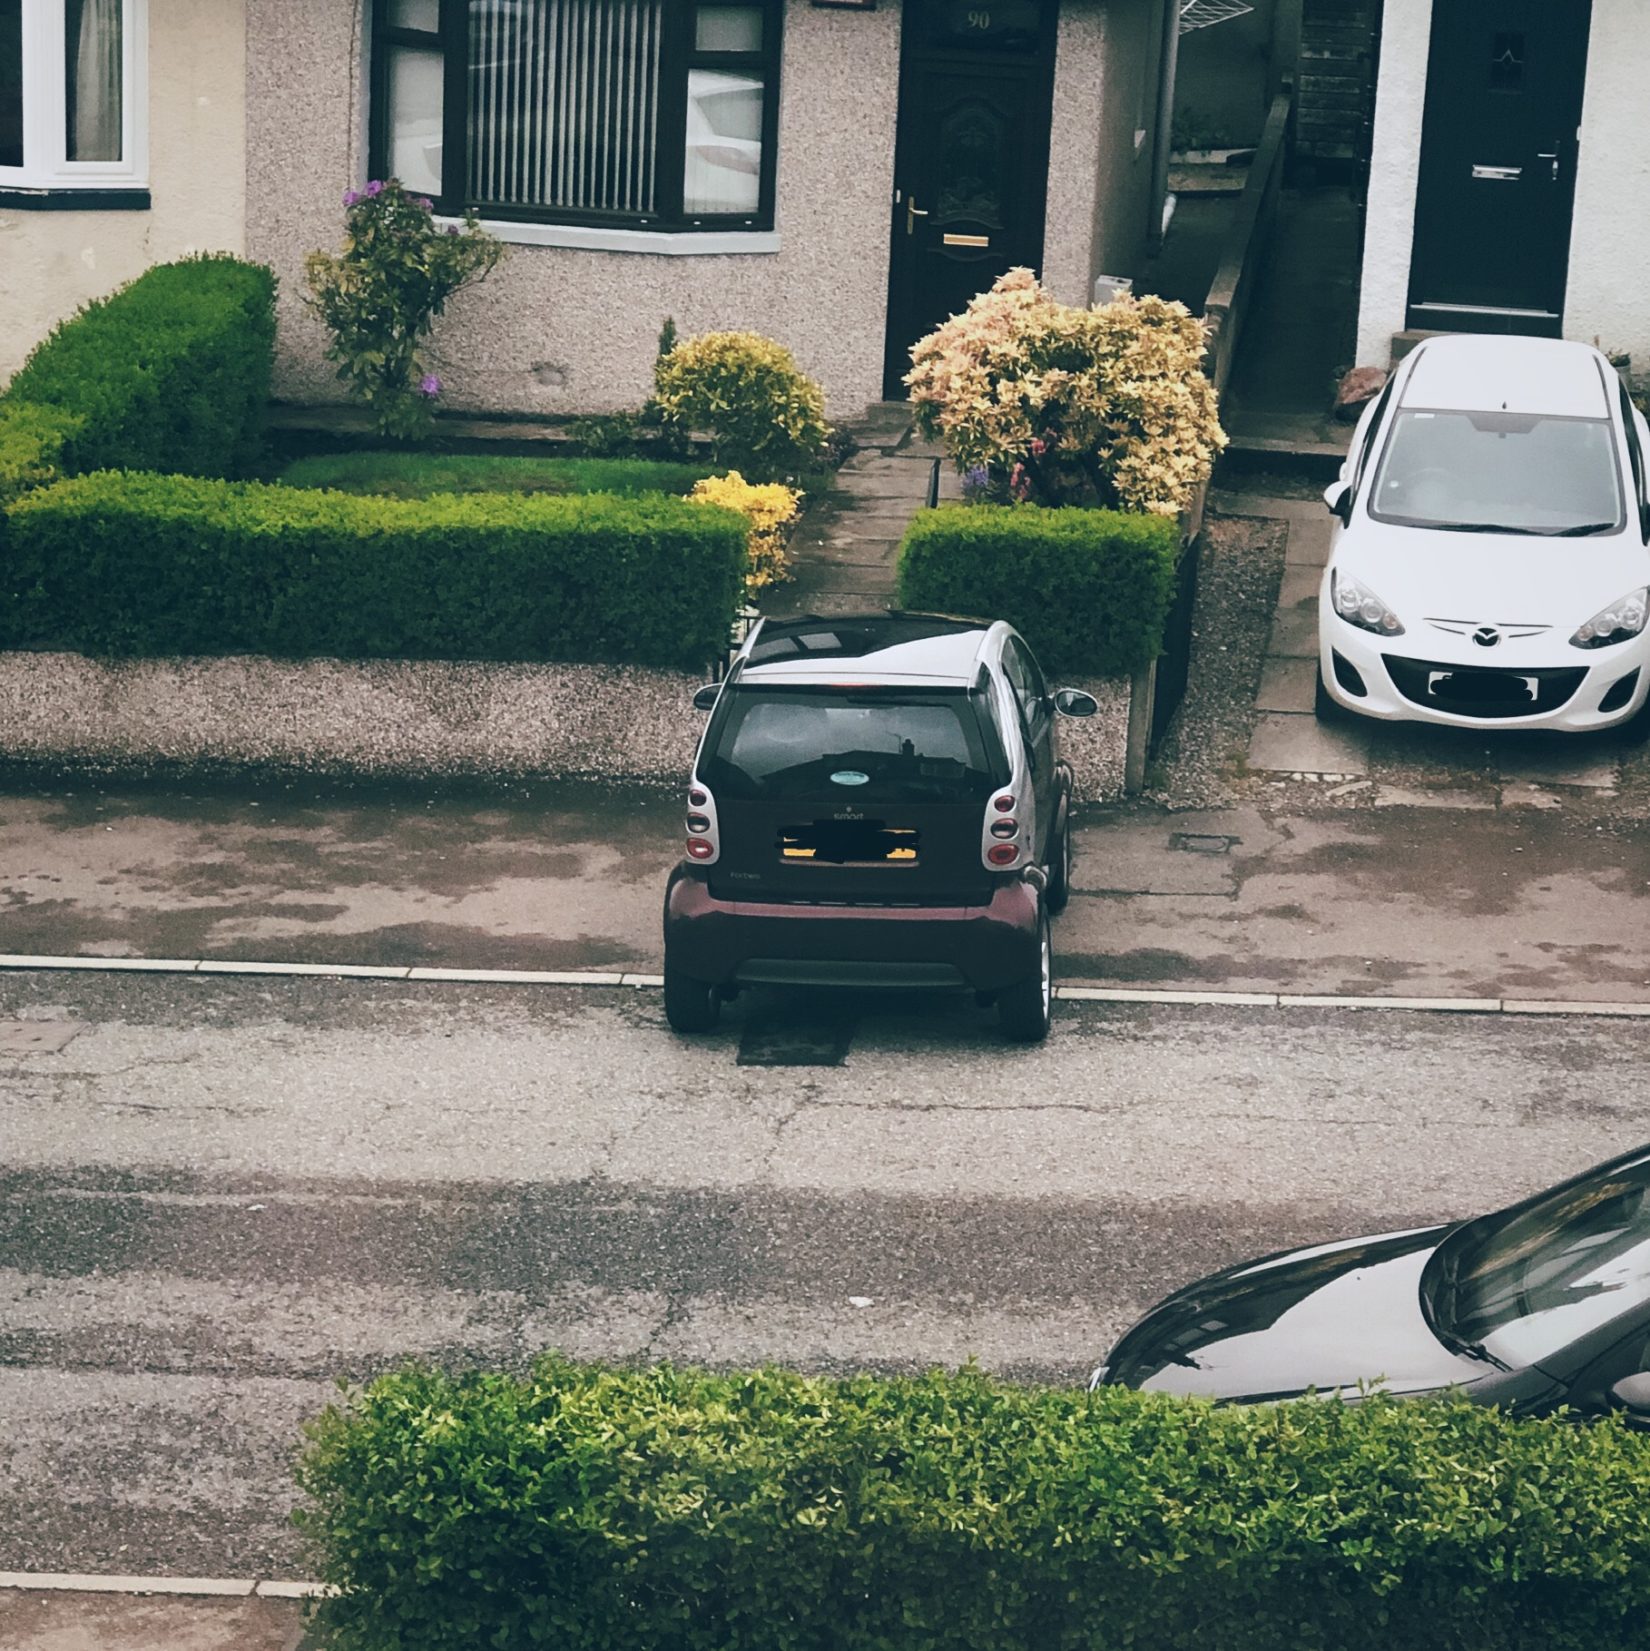 Tiny car parked in a way to block the pavement